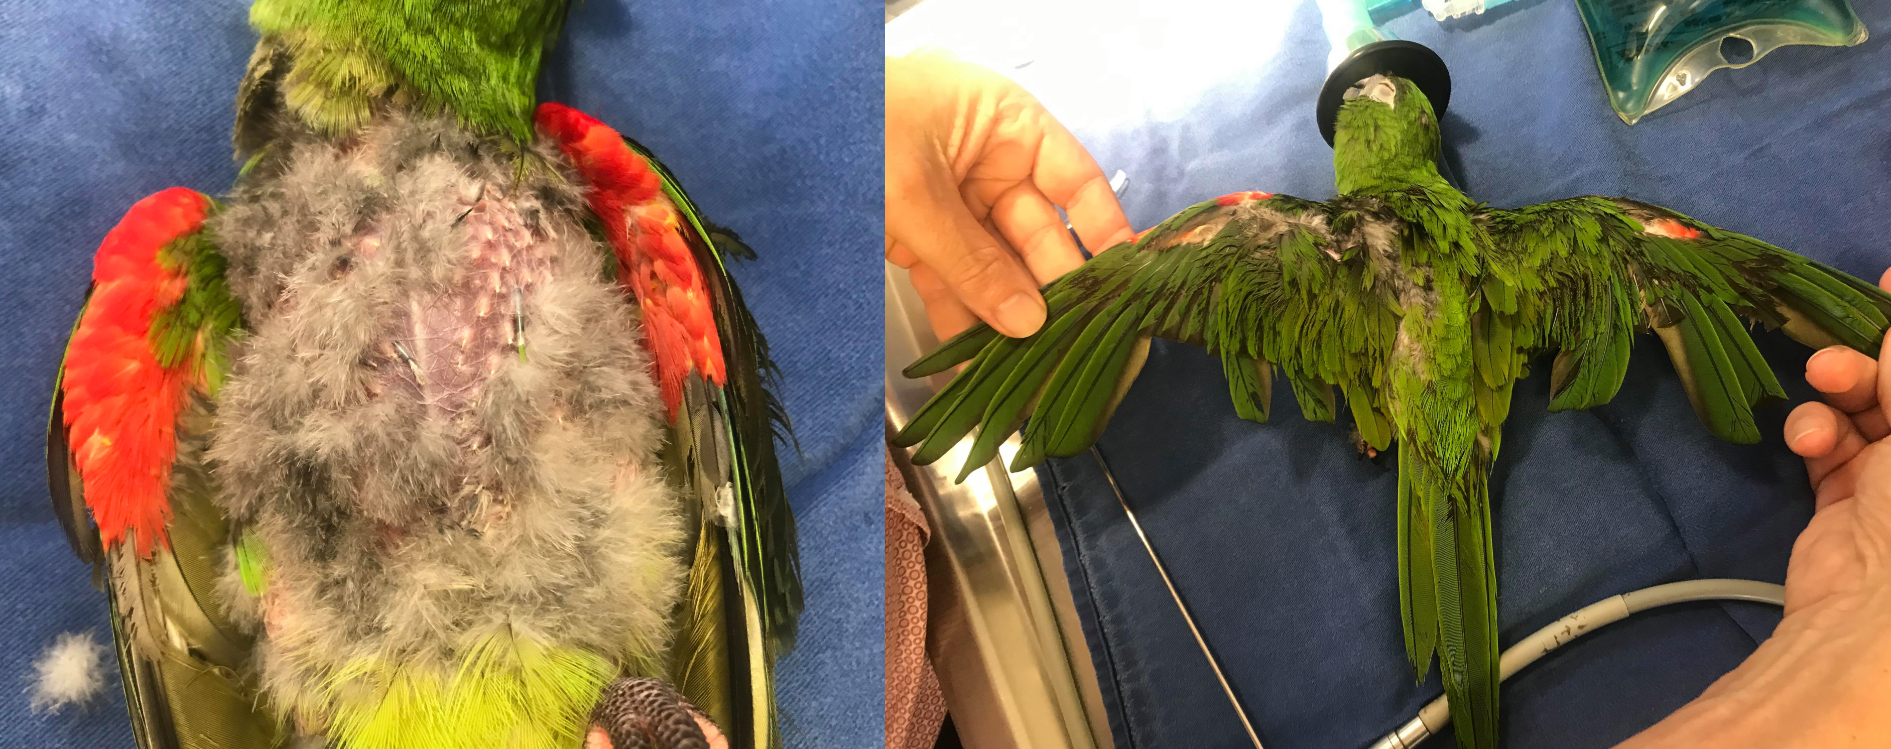 This bird's avian vet believes that the trimming of wings, along with a lack of enrichment, played a significant role in the development of his feather destructive behaviour (in this case the barbering and snapping of feathers).  An update on the same bird appears immediately below.